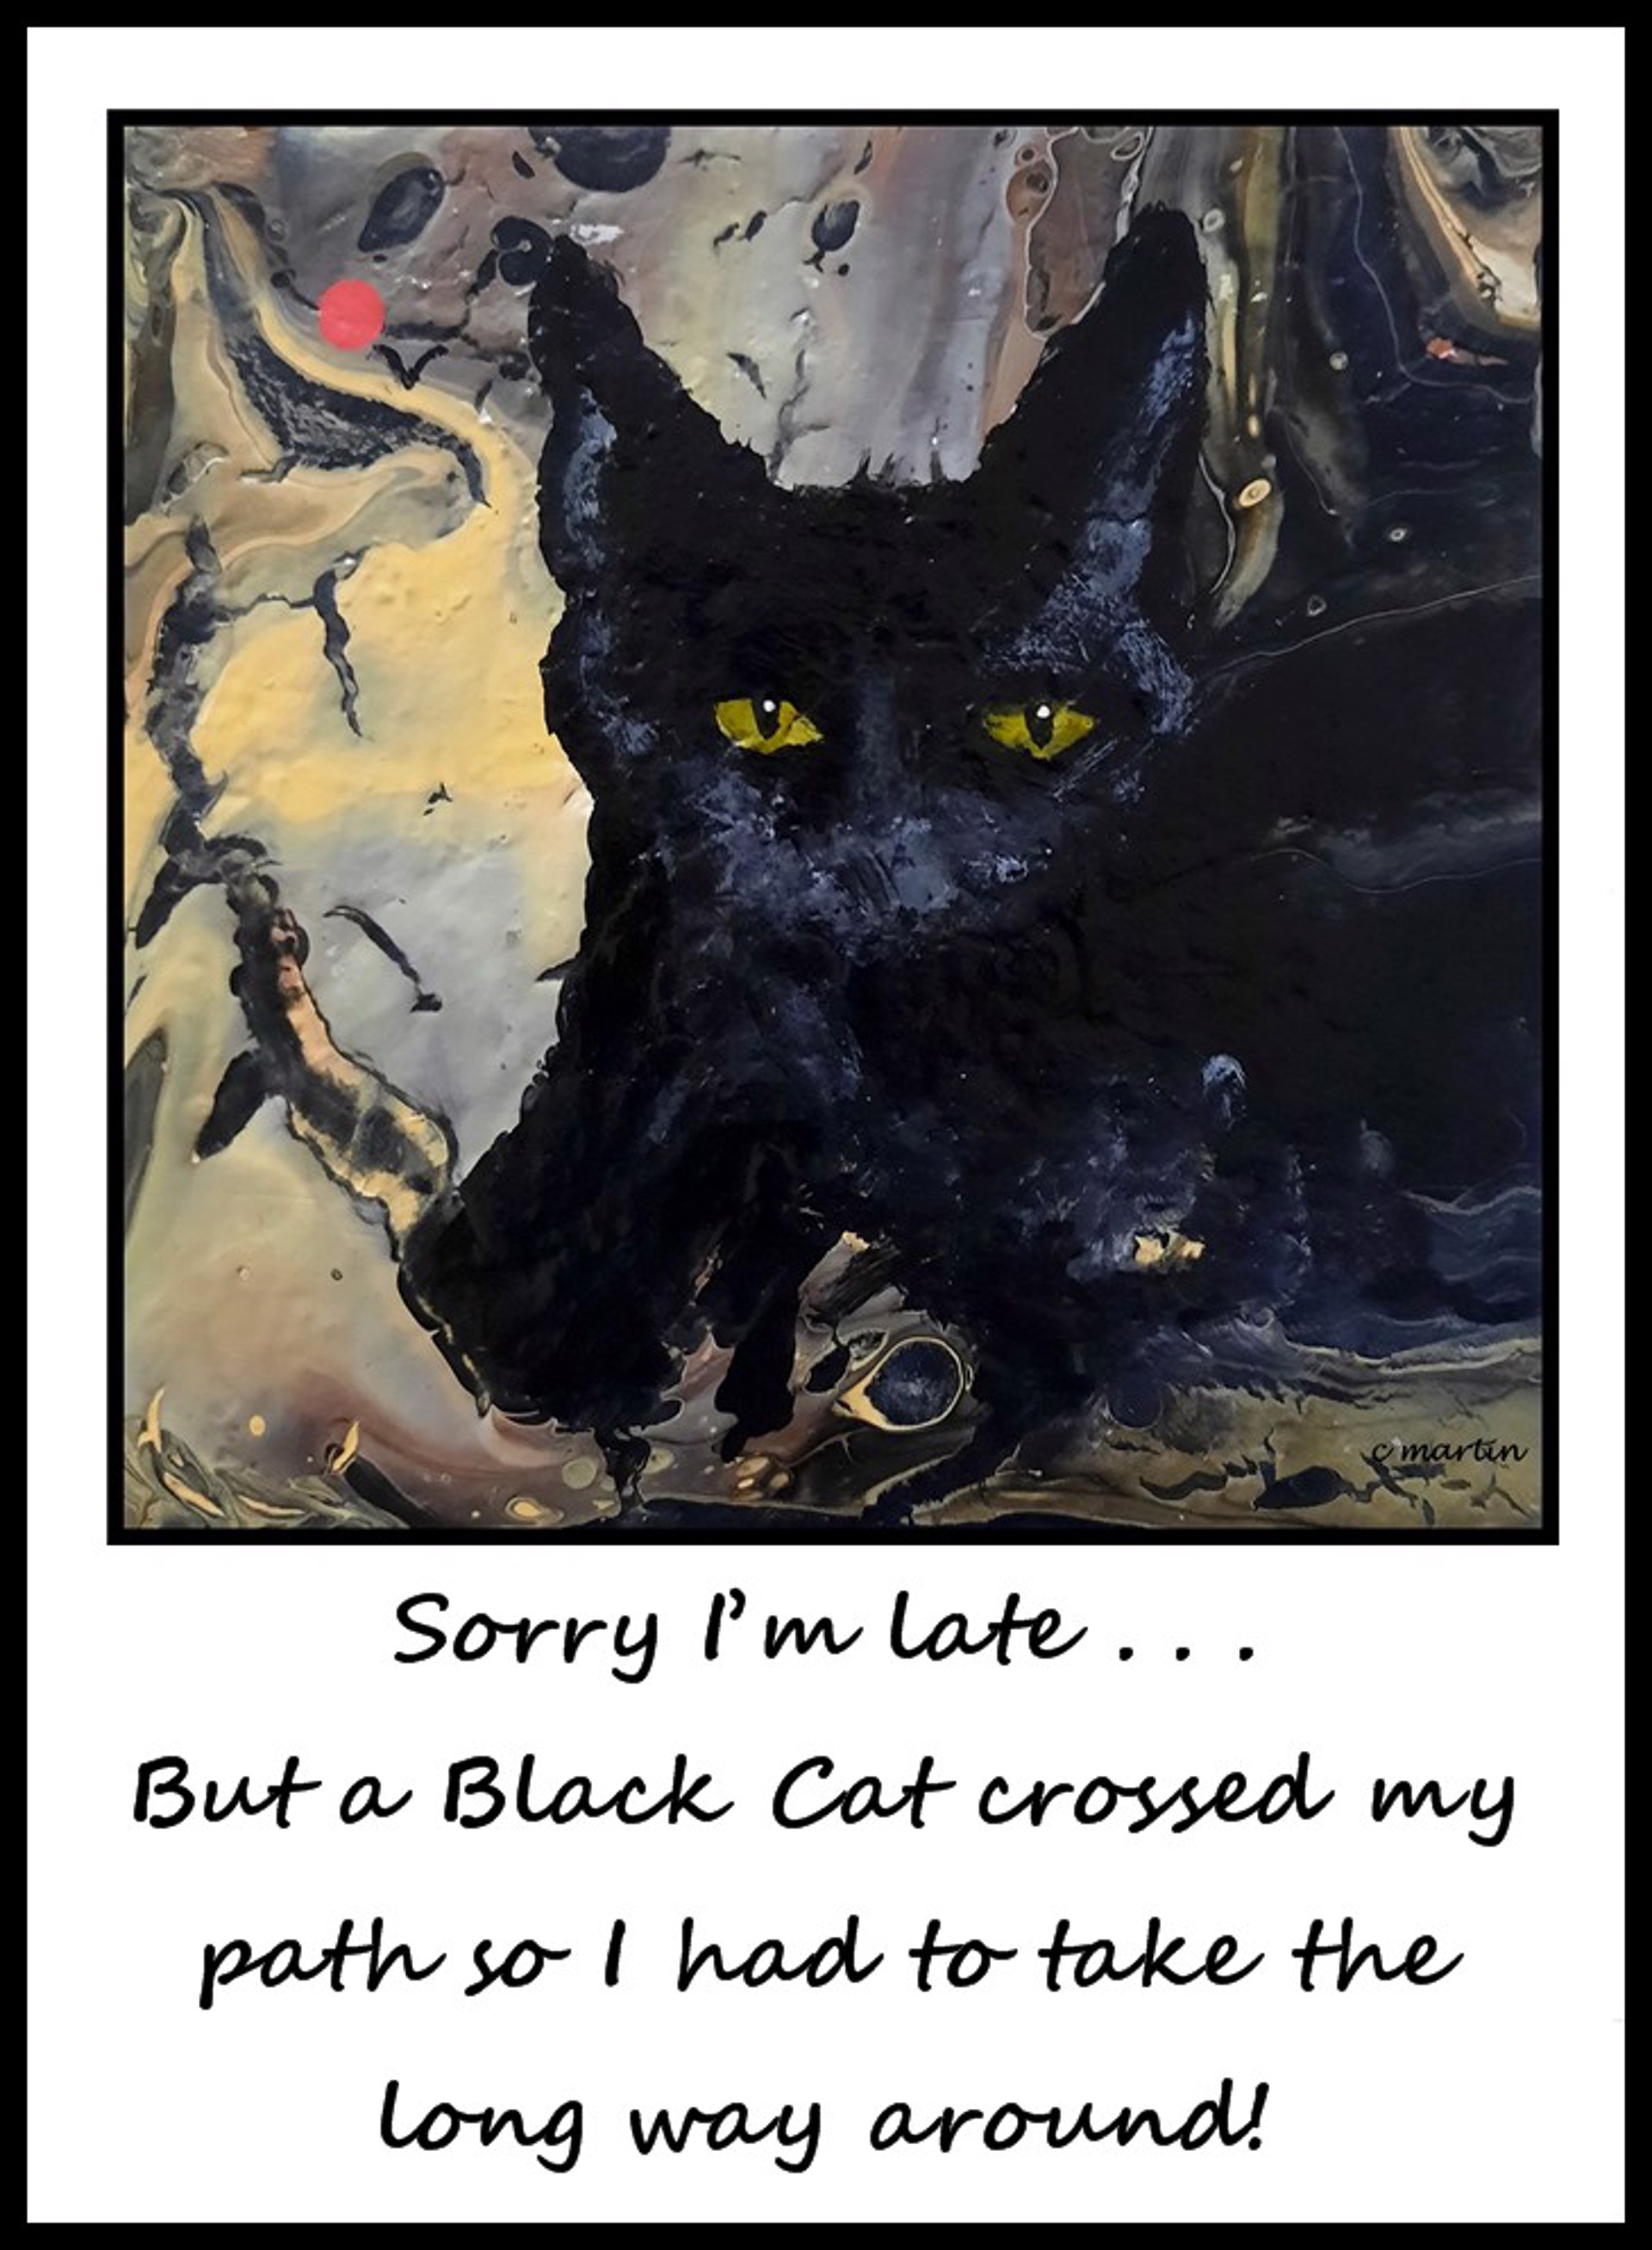 "SORRY I'M LATE ..." (blk cat)